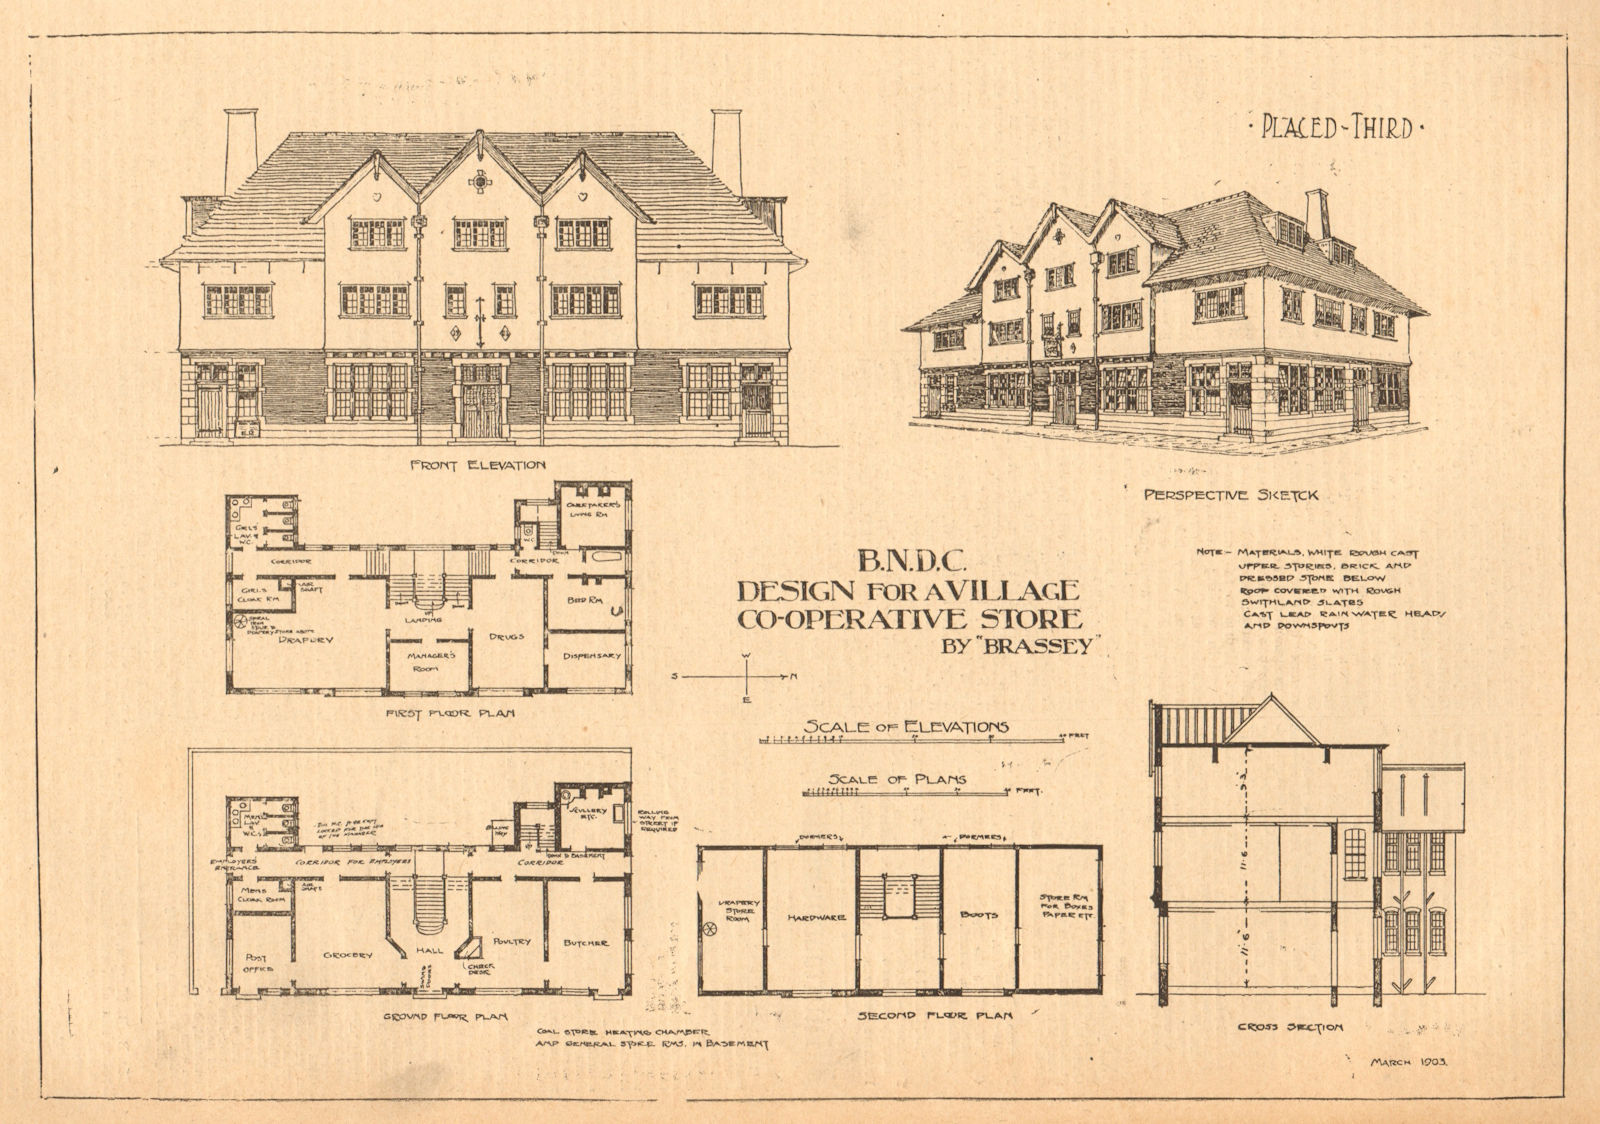 Design for a village Co-operative store by Brassley. Plans, elevations 1903